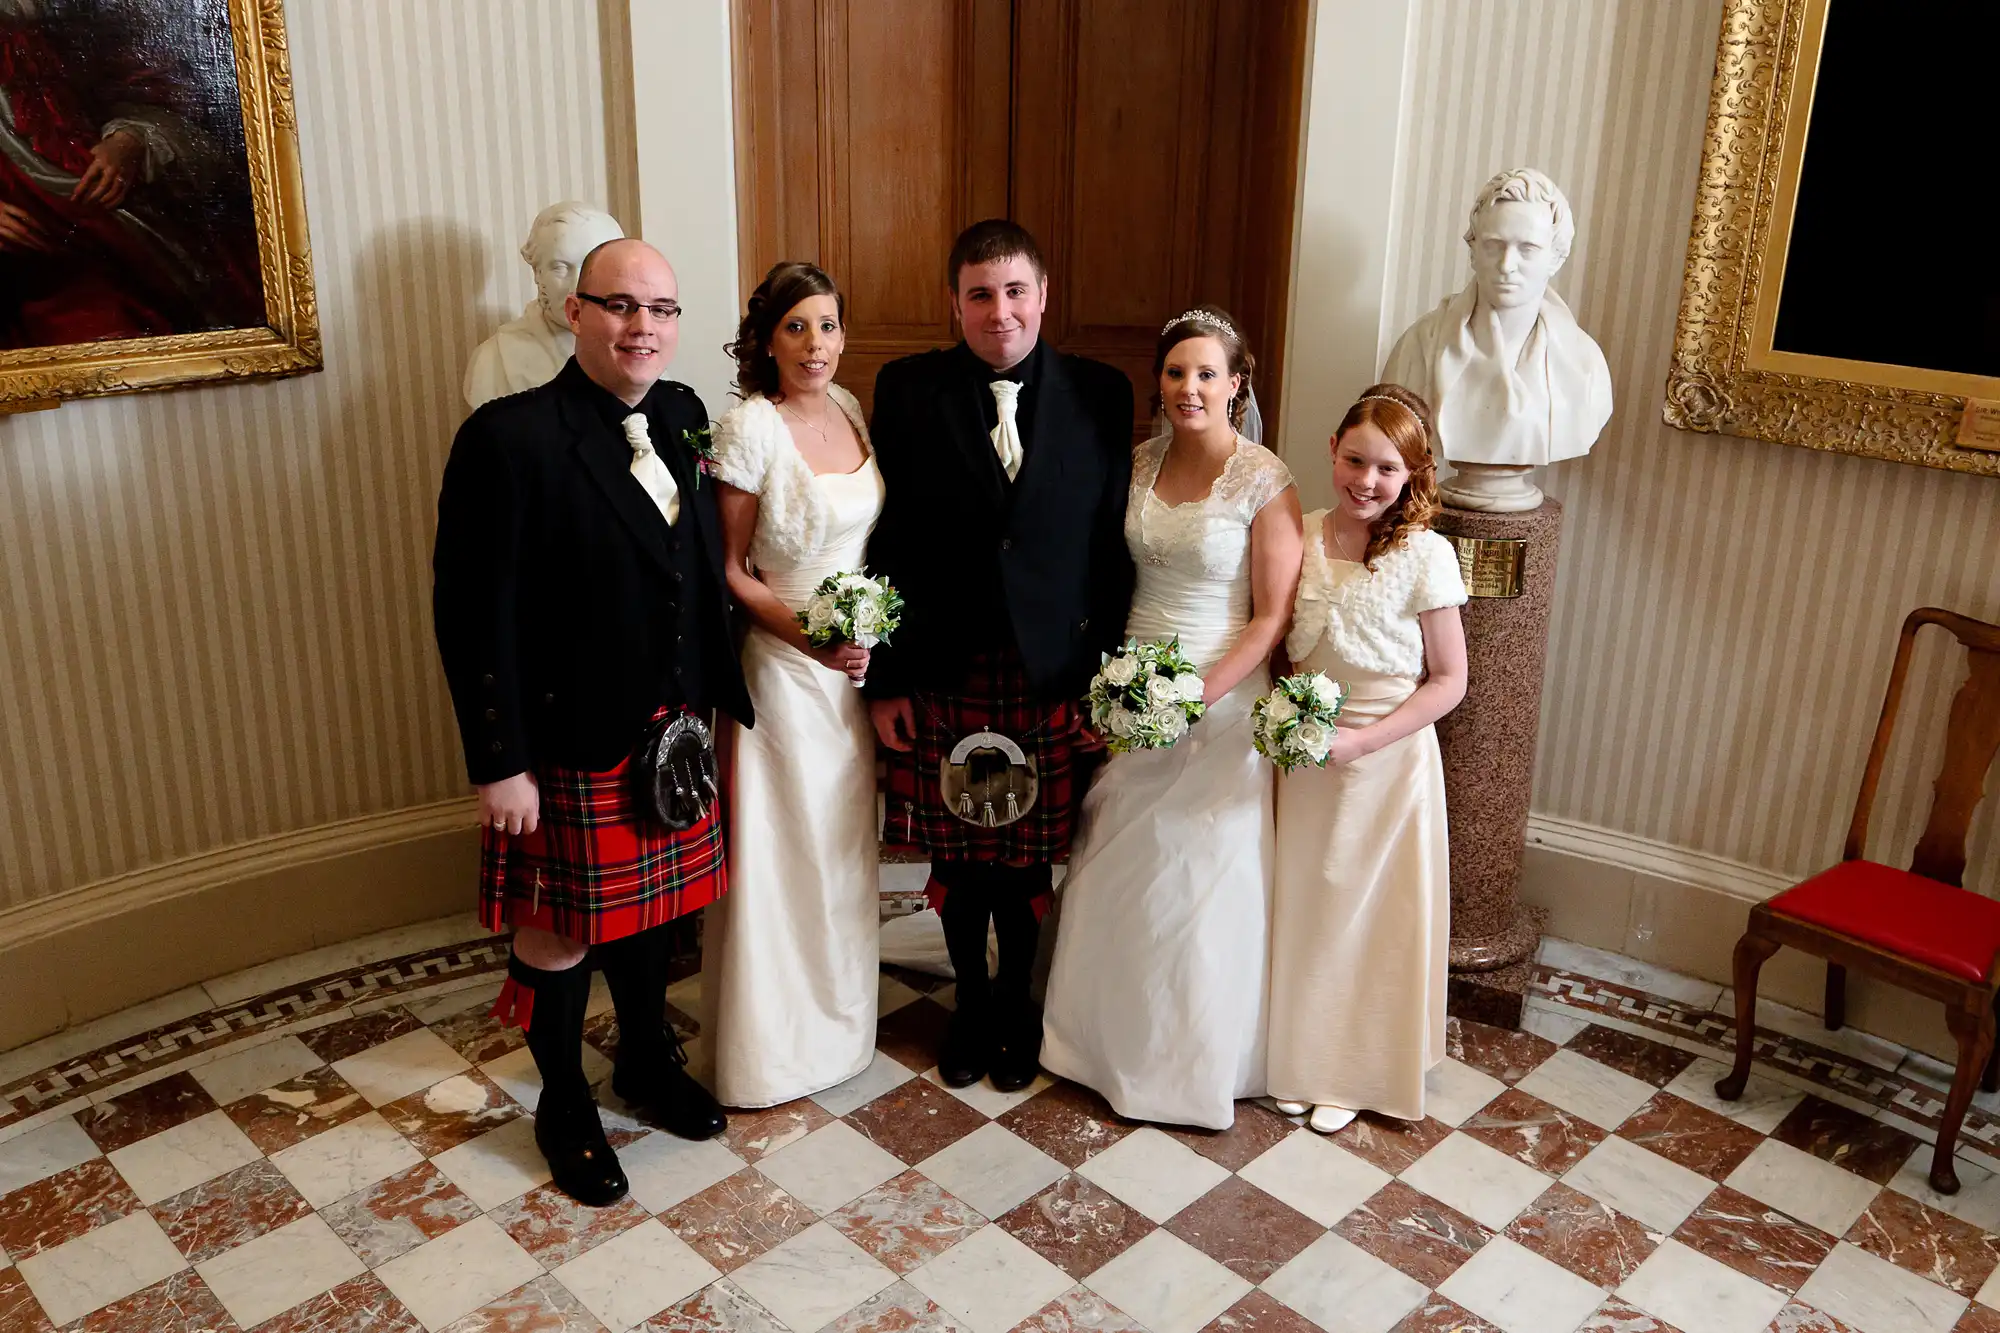 Five individuals in formal wedding attire, two men in kilts, pose together in an elegant room with classical bust sculptures and paintings.